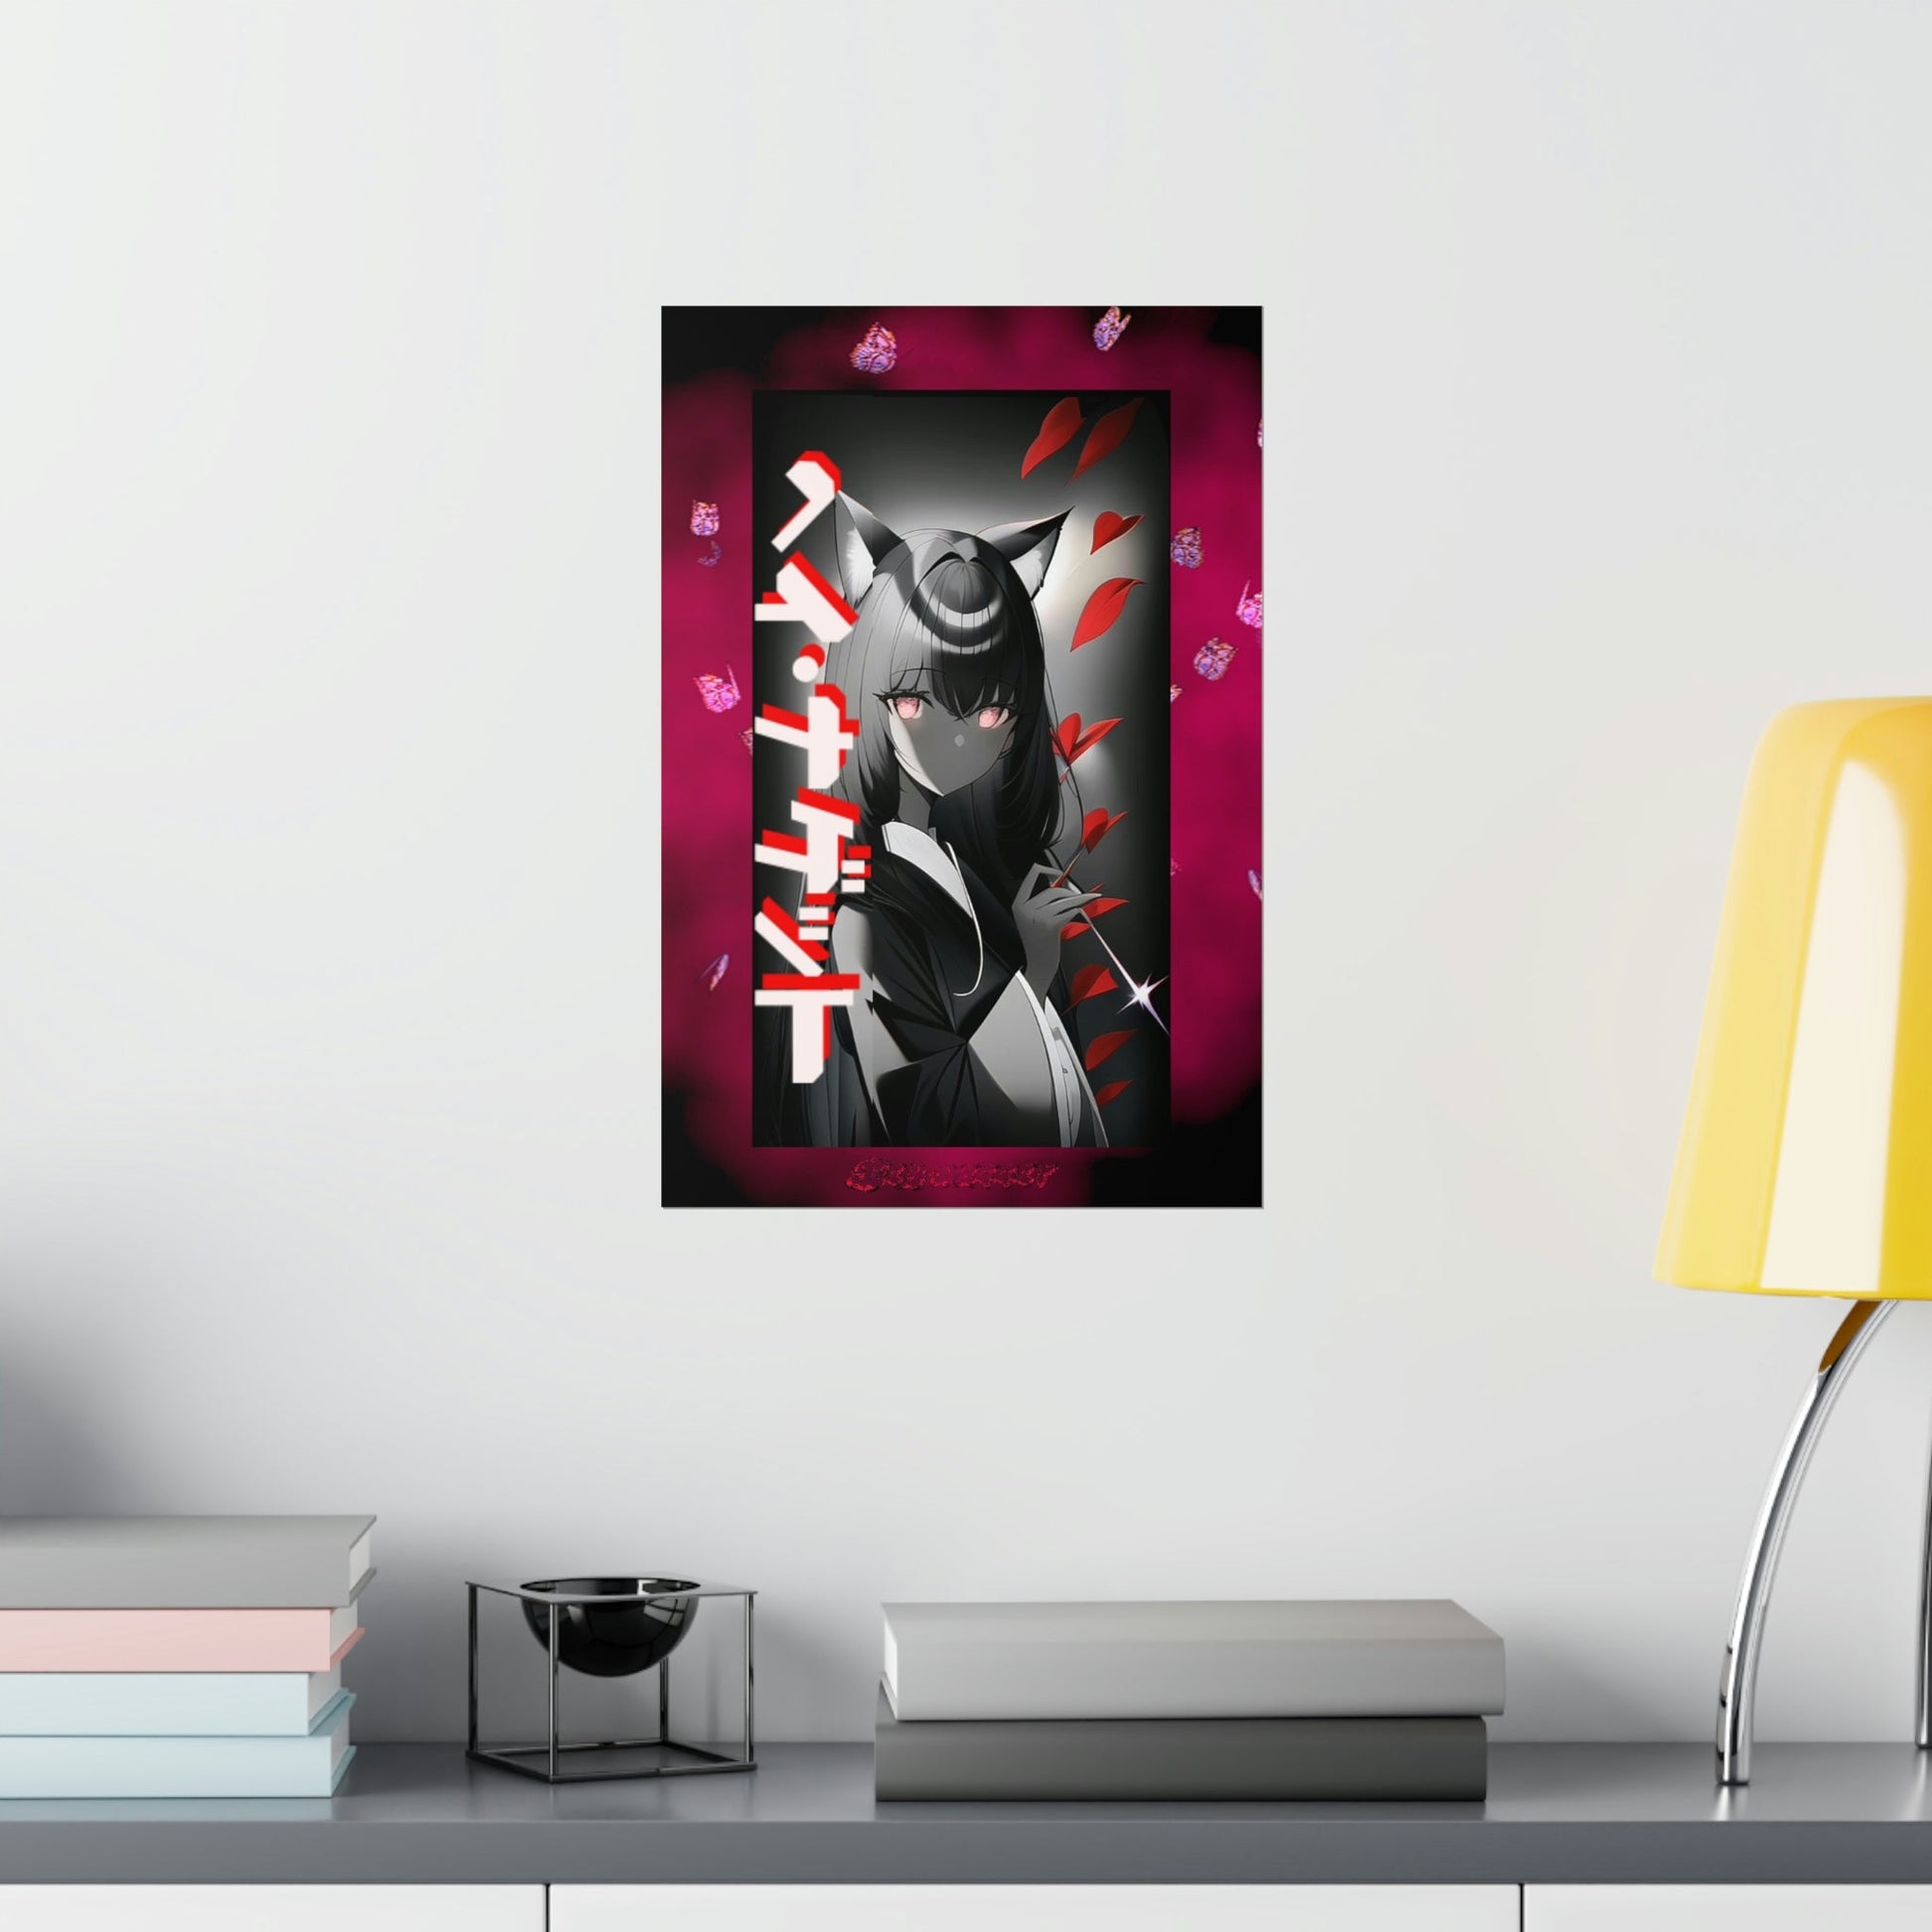 Stand out  with the  Tokyo Nugget Matte Poster  available at Hey Nugget. Grab yours today!